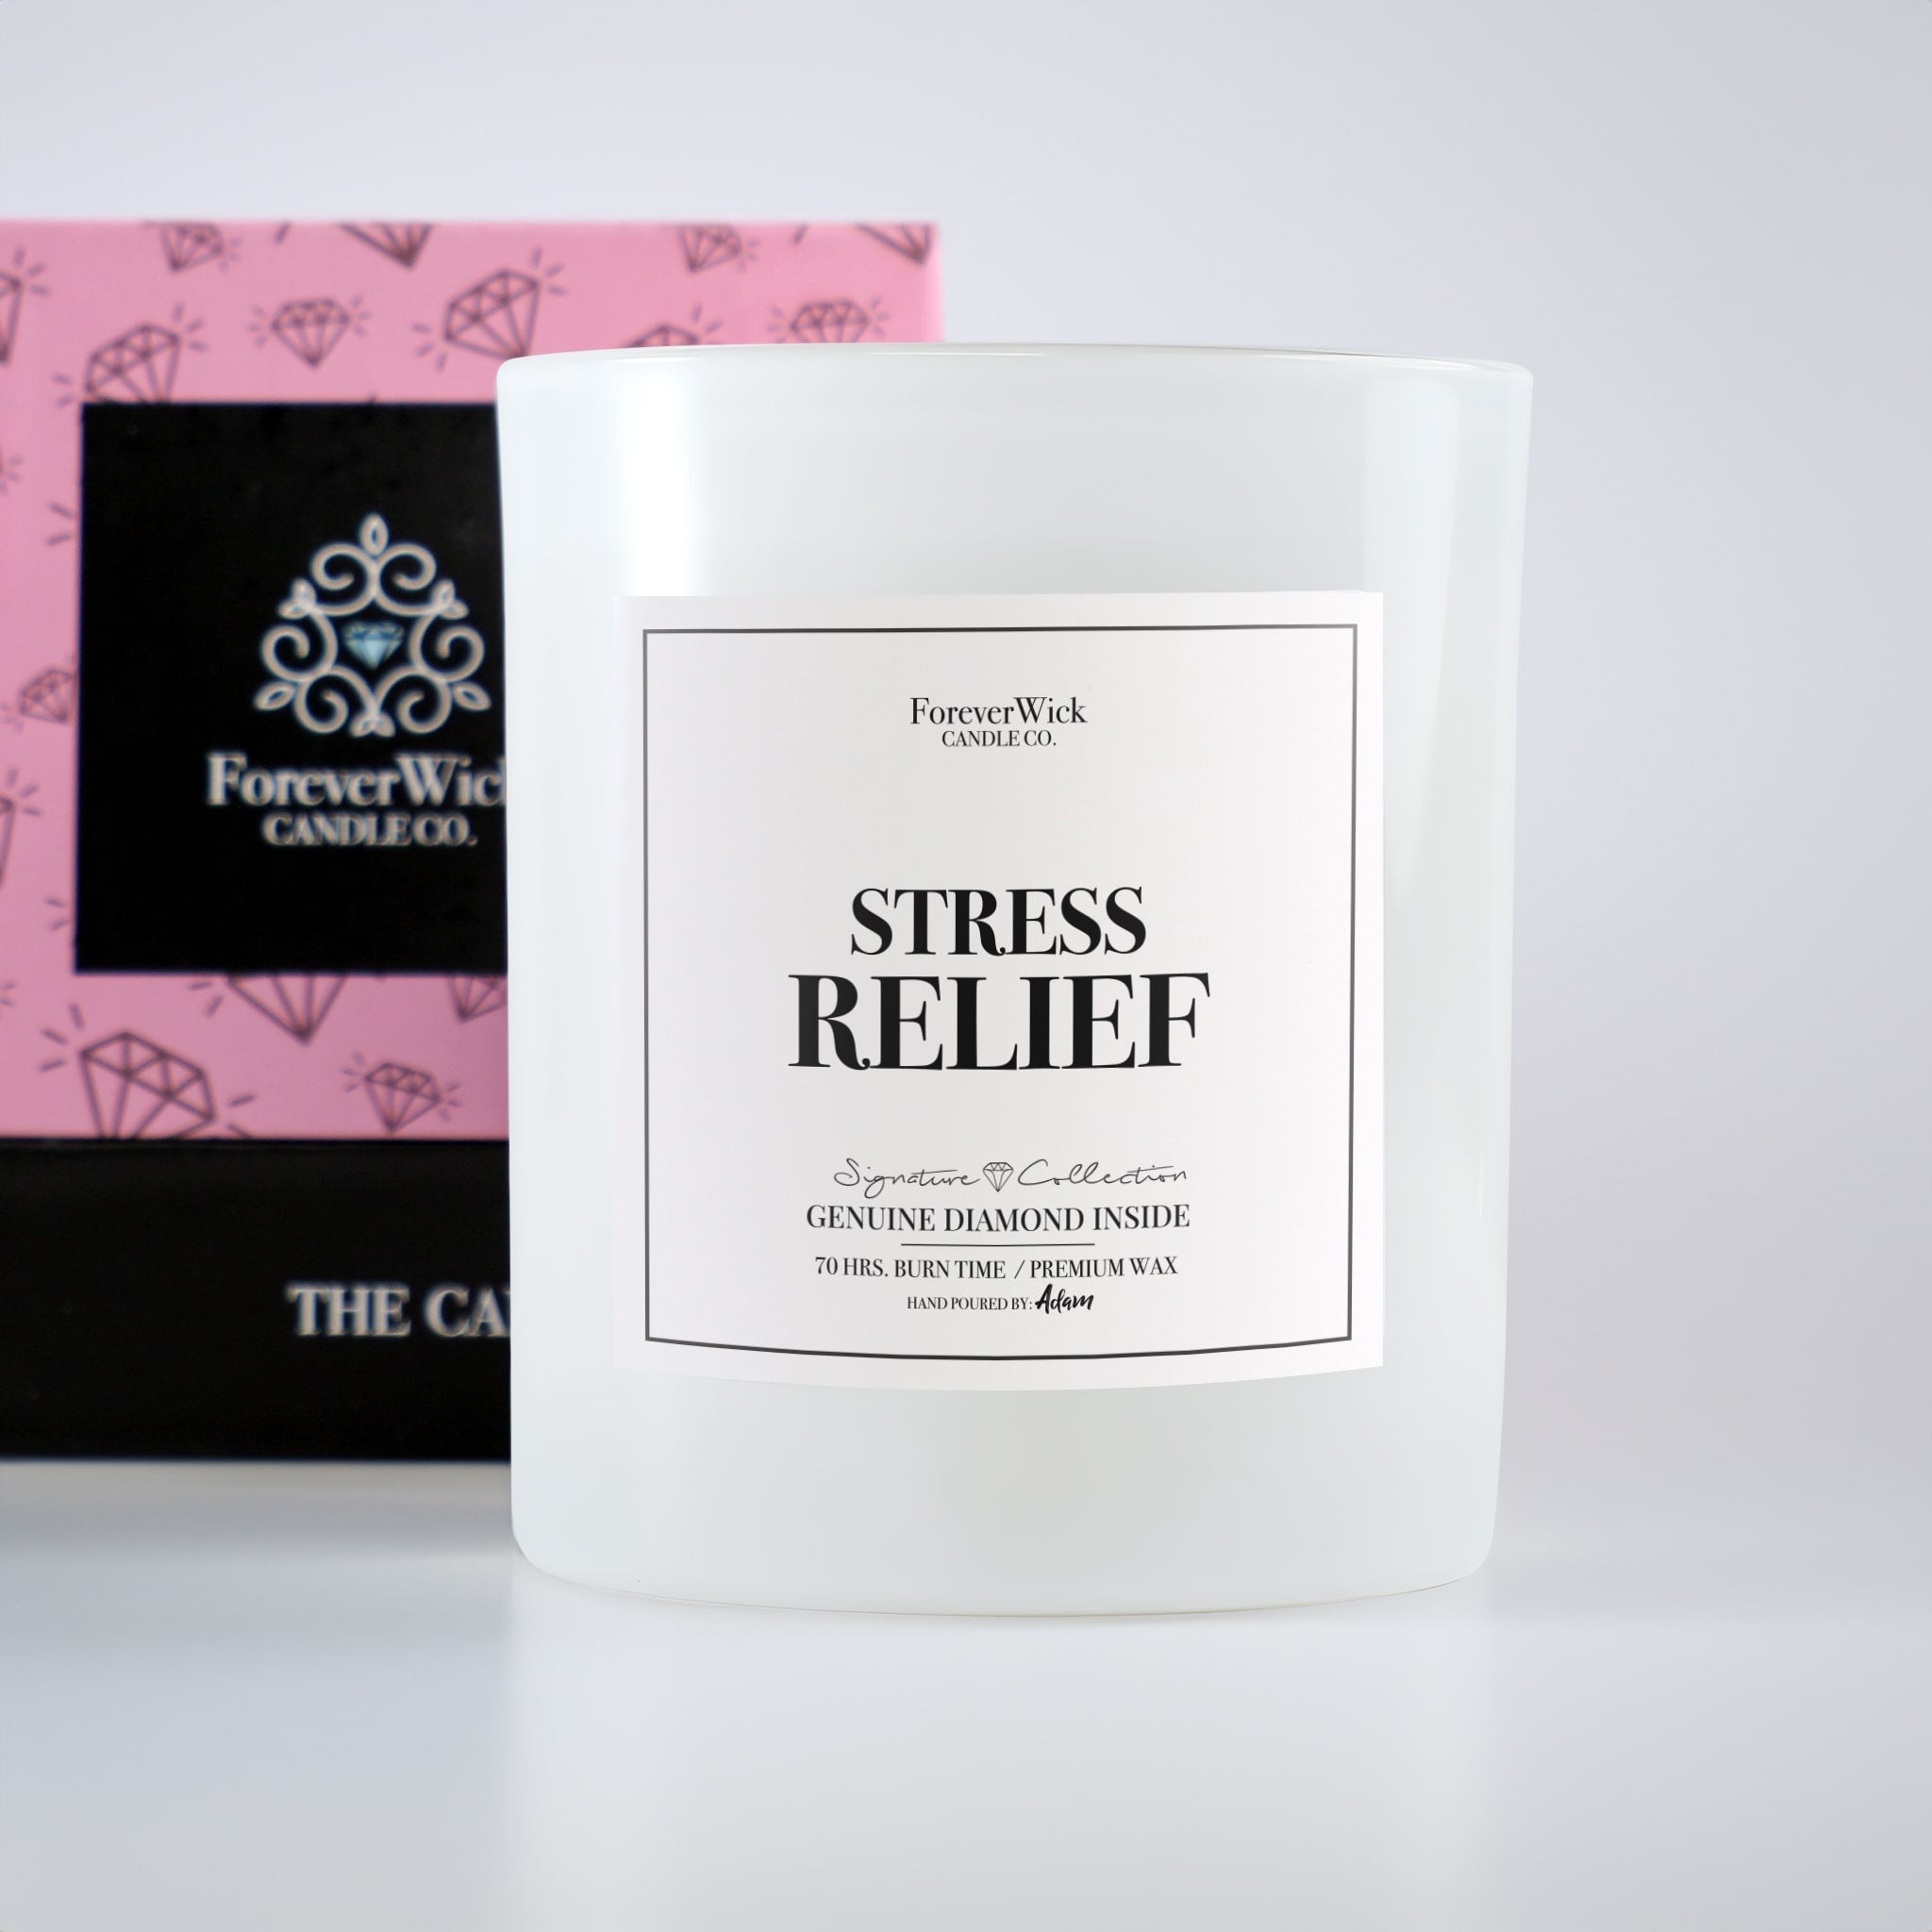 Stress Relief Diamond Candle